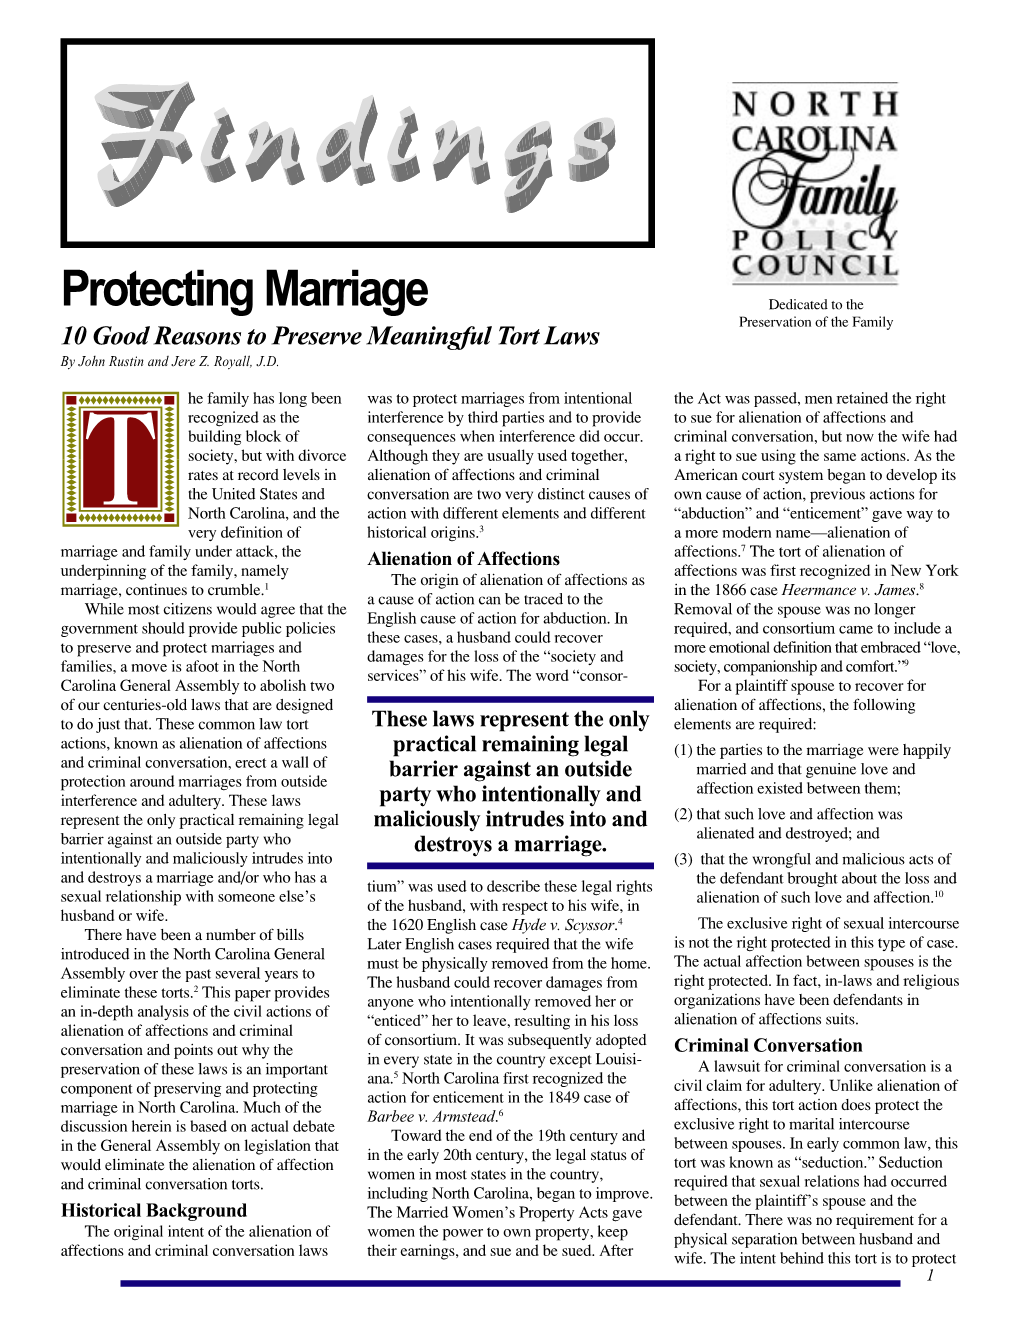 Protecting Marriage Dedicated to the Preservation of the Family 10 Good Reasons to Preserve Meaningful Tort Laws by John Rustin and Jere Z